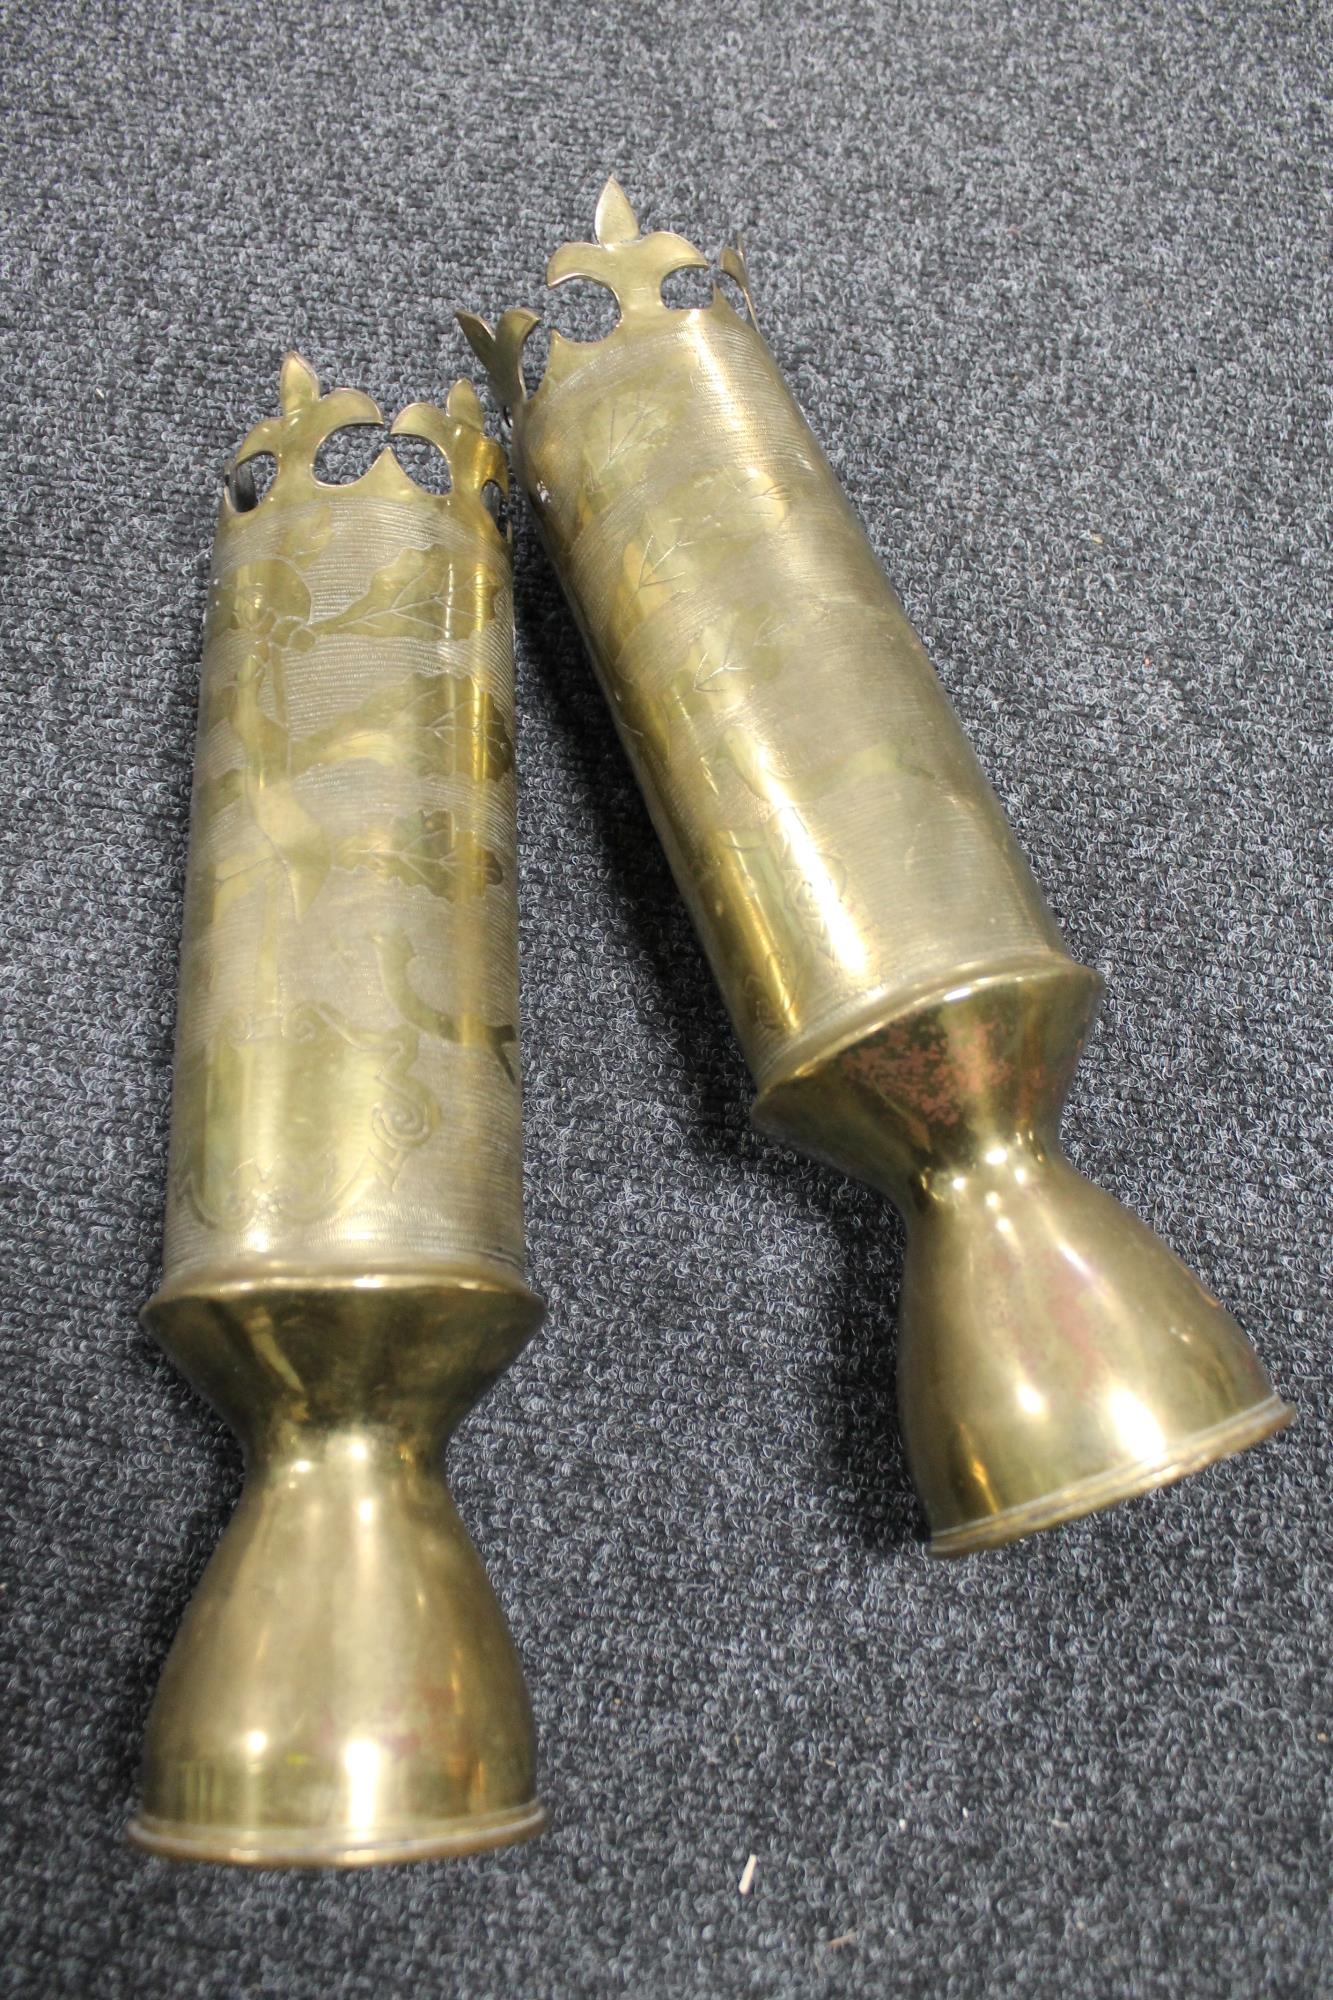 Two early 20th century brass trench art shells